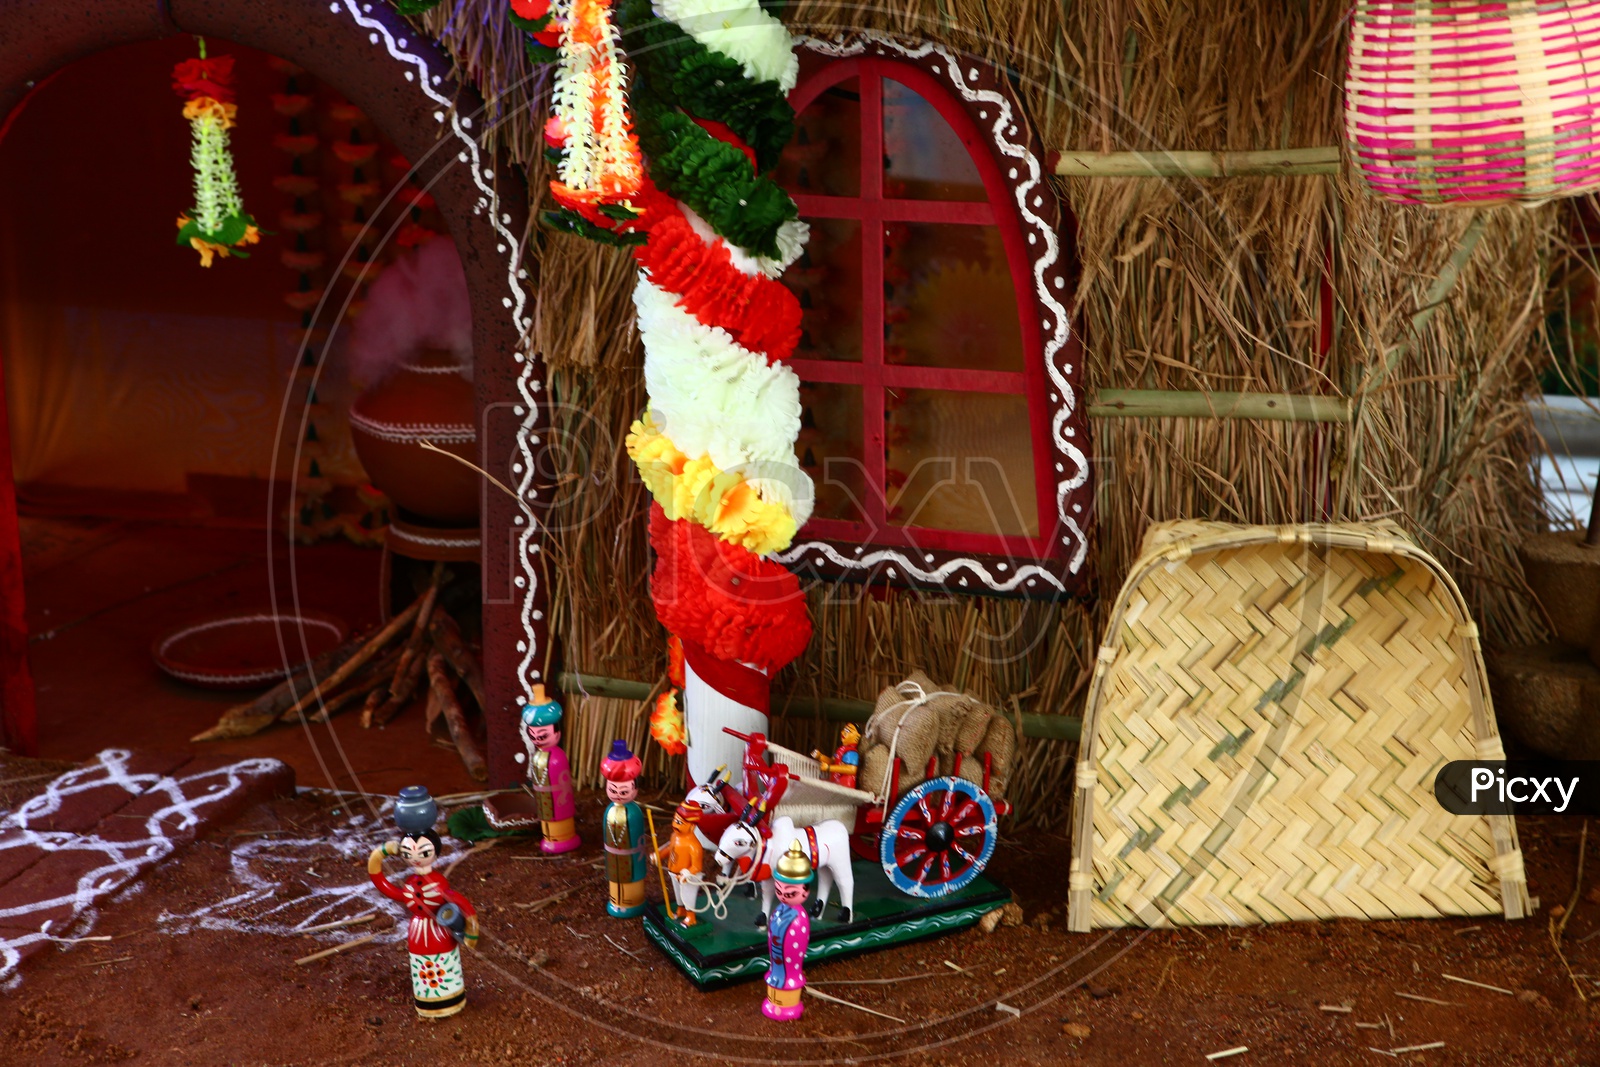 Handcrafted figurines alongside the hut